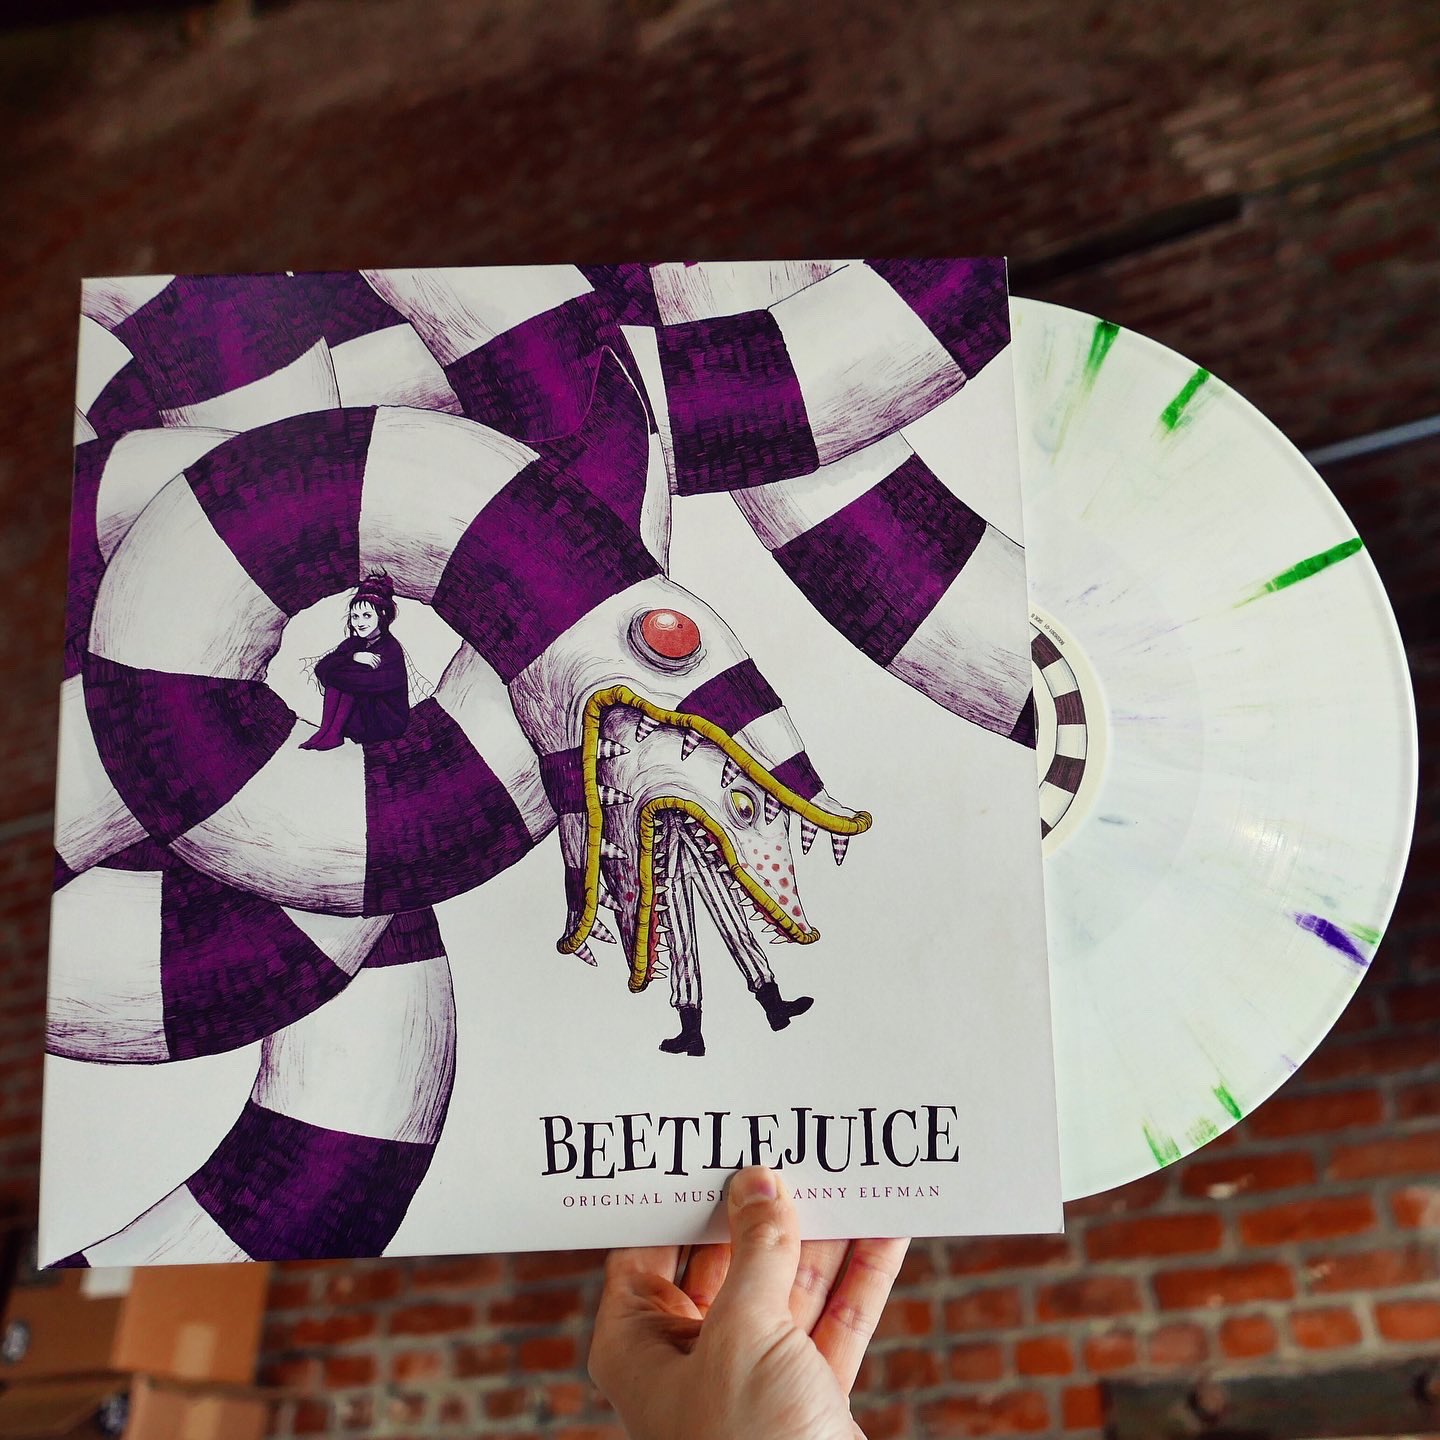 Specialisere film Busk Waxwork Records on Twitter: "BEETLEJUICE was released in theaters on this  day in 1988! We are asked daily if we will be bringing our deluxe BEETLEJUICE  soundtrack vinyl back from the grave.